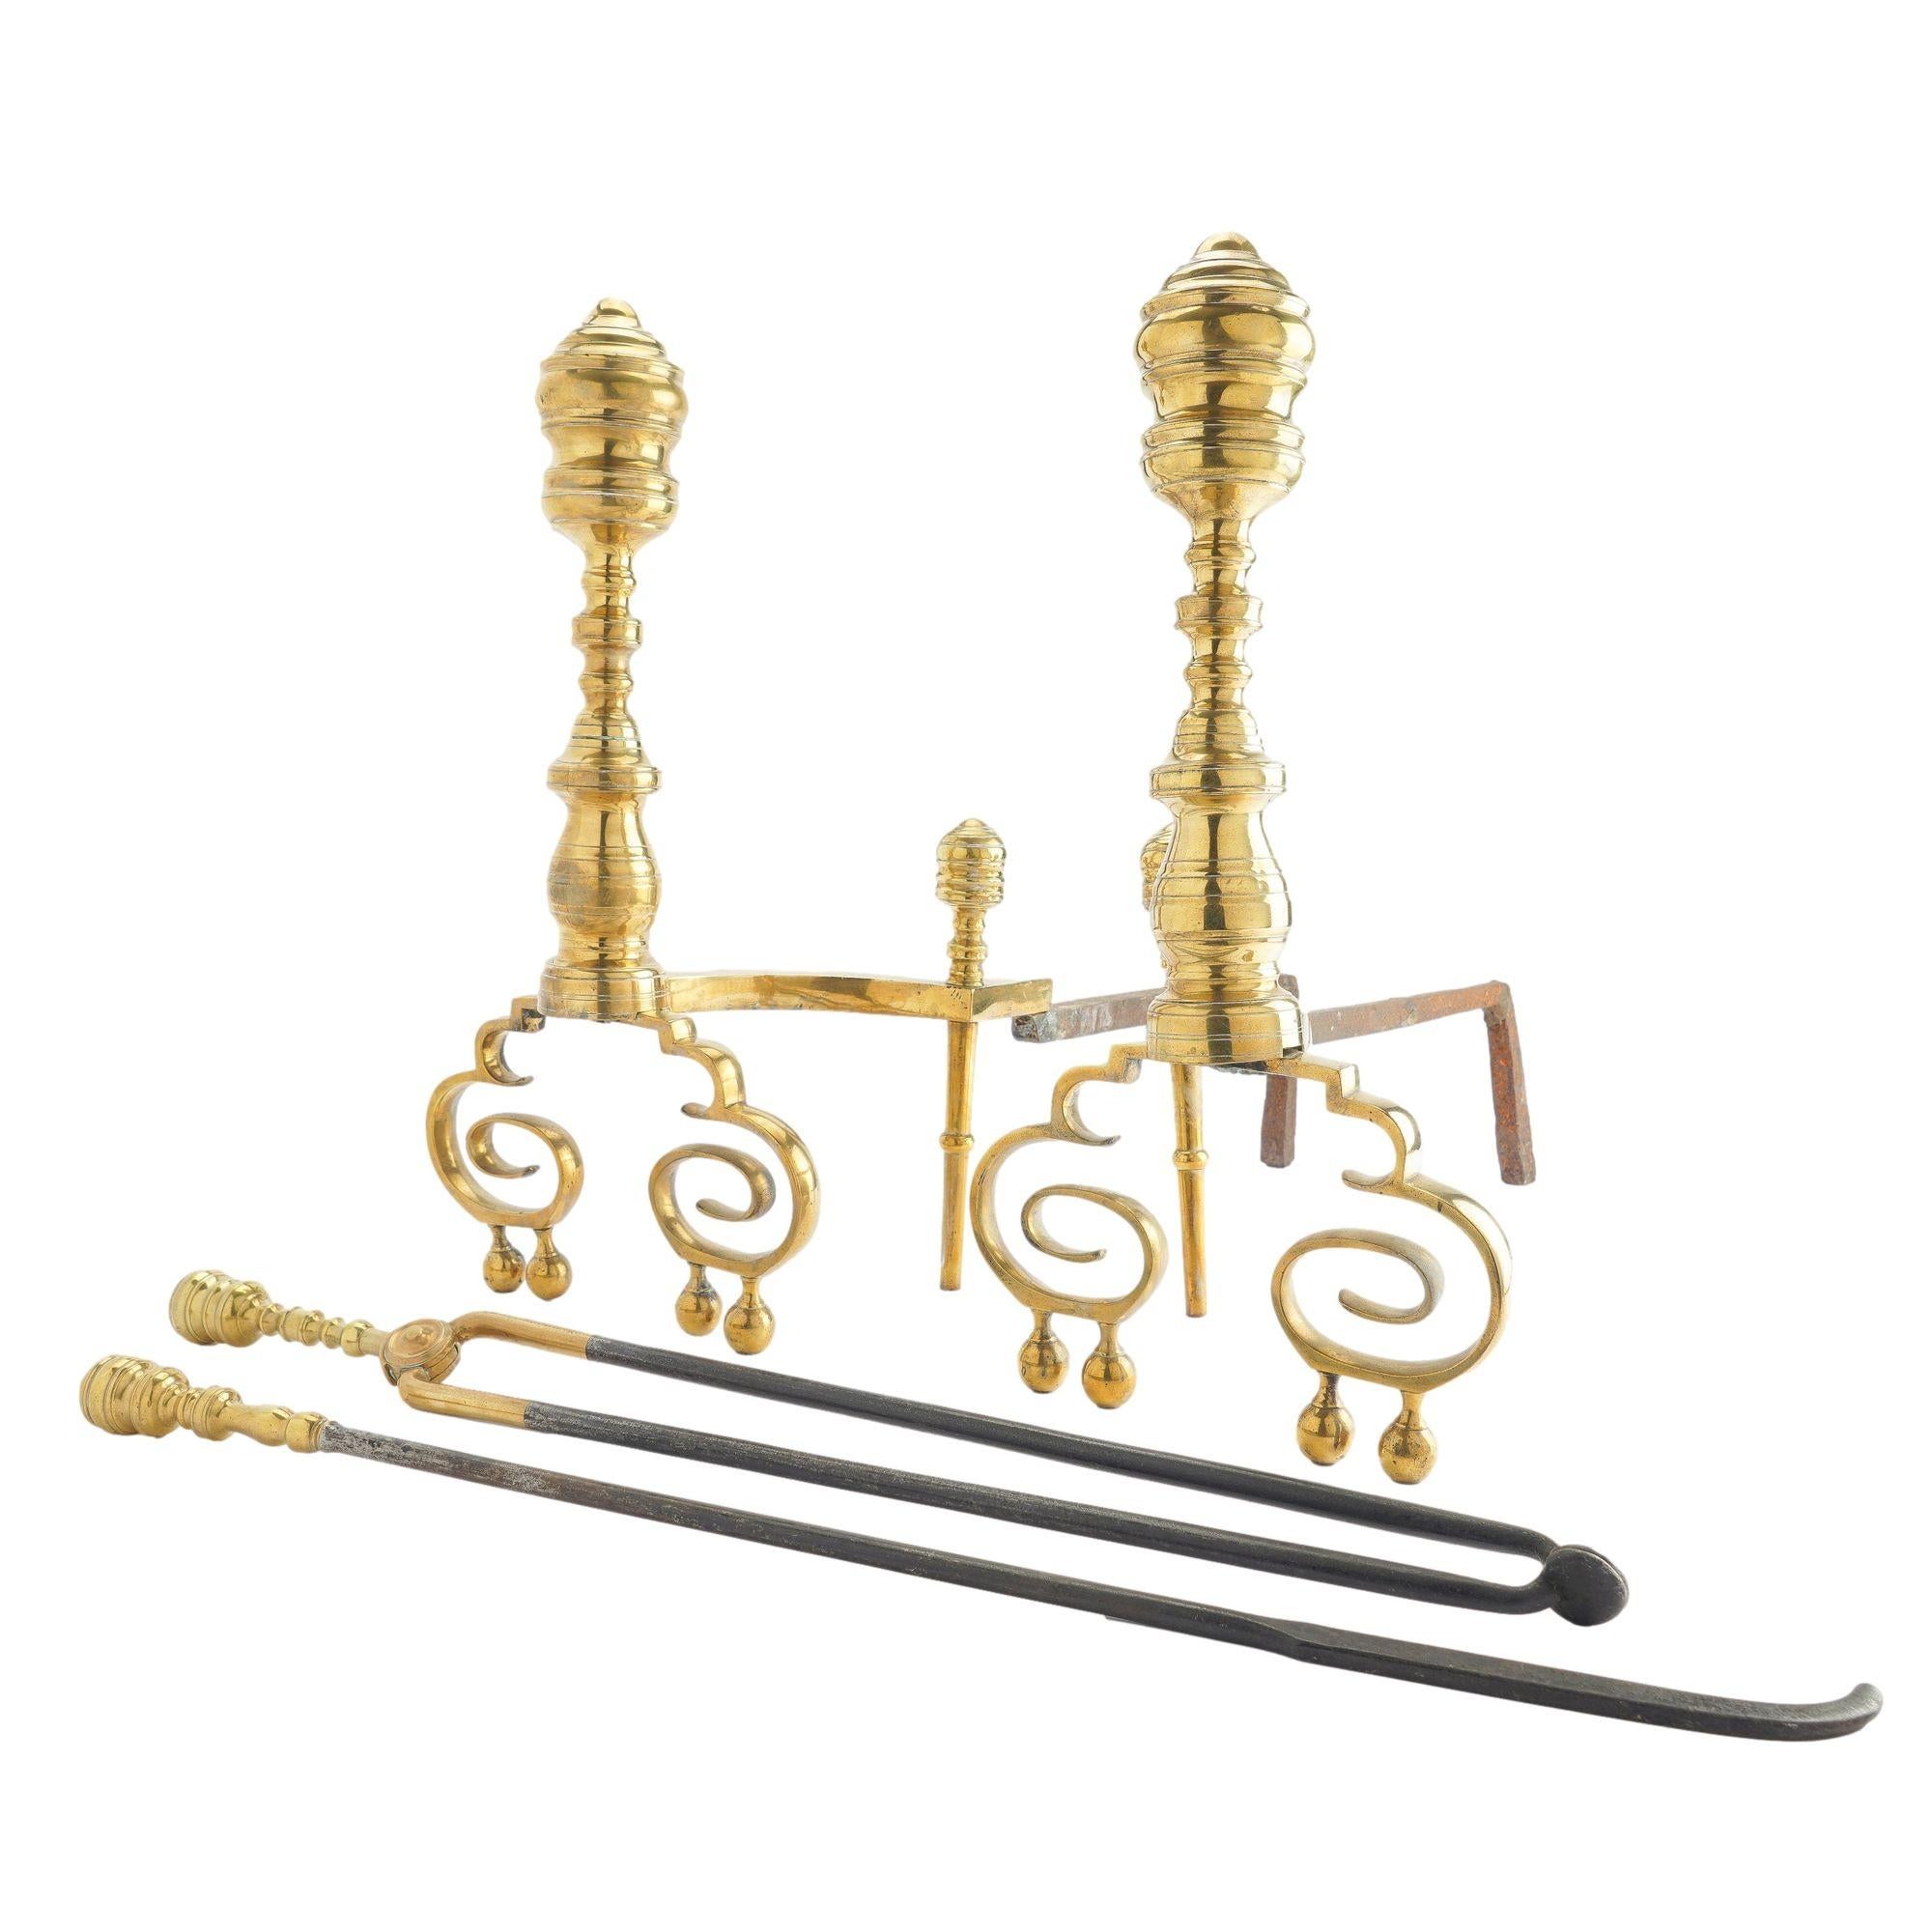 Pair of American cast brass baluster form Neoclassic andirons with matching fire tools. The andirons feature scrolled legs on double pairs of ball feet, and the gated log rests are fitted with cast brass baluster finial log stops. The baluster